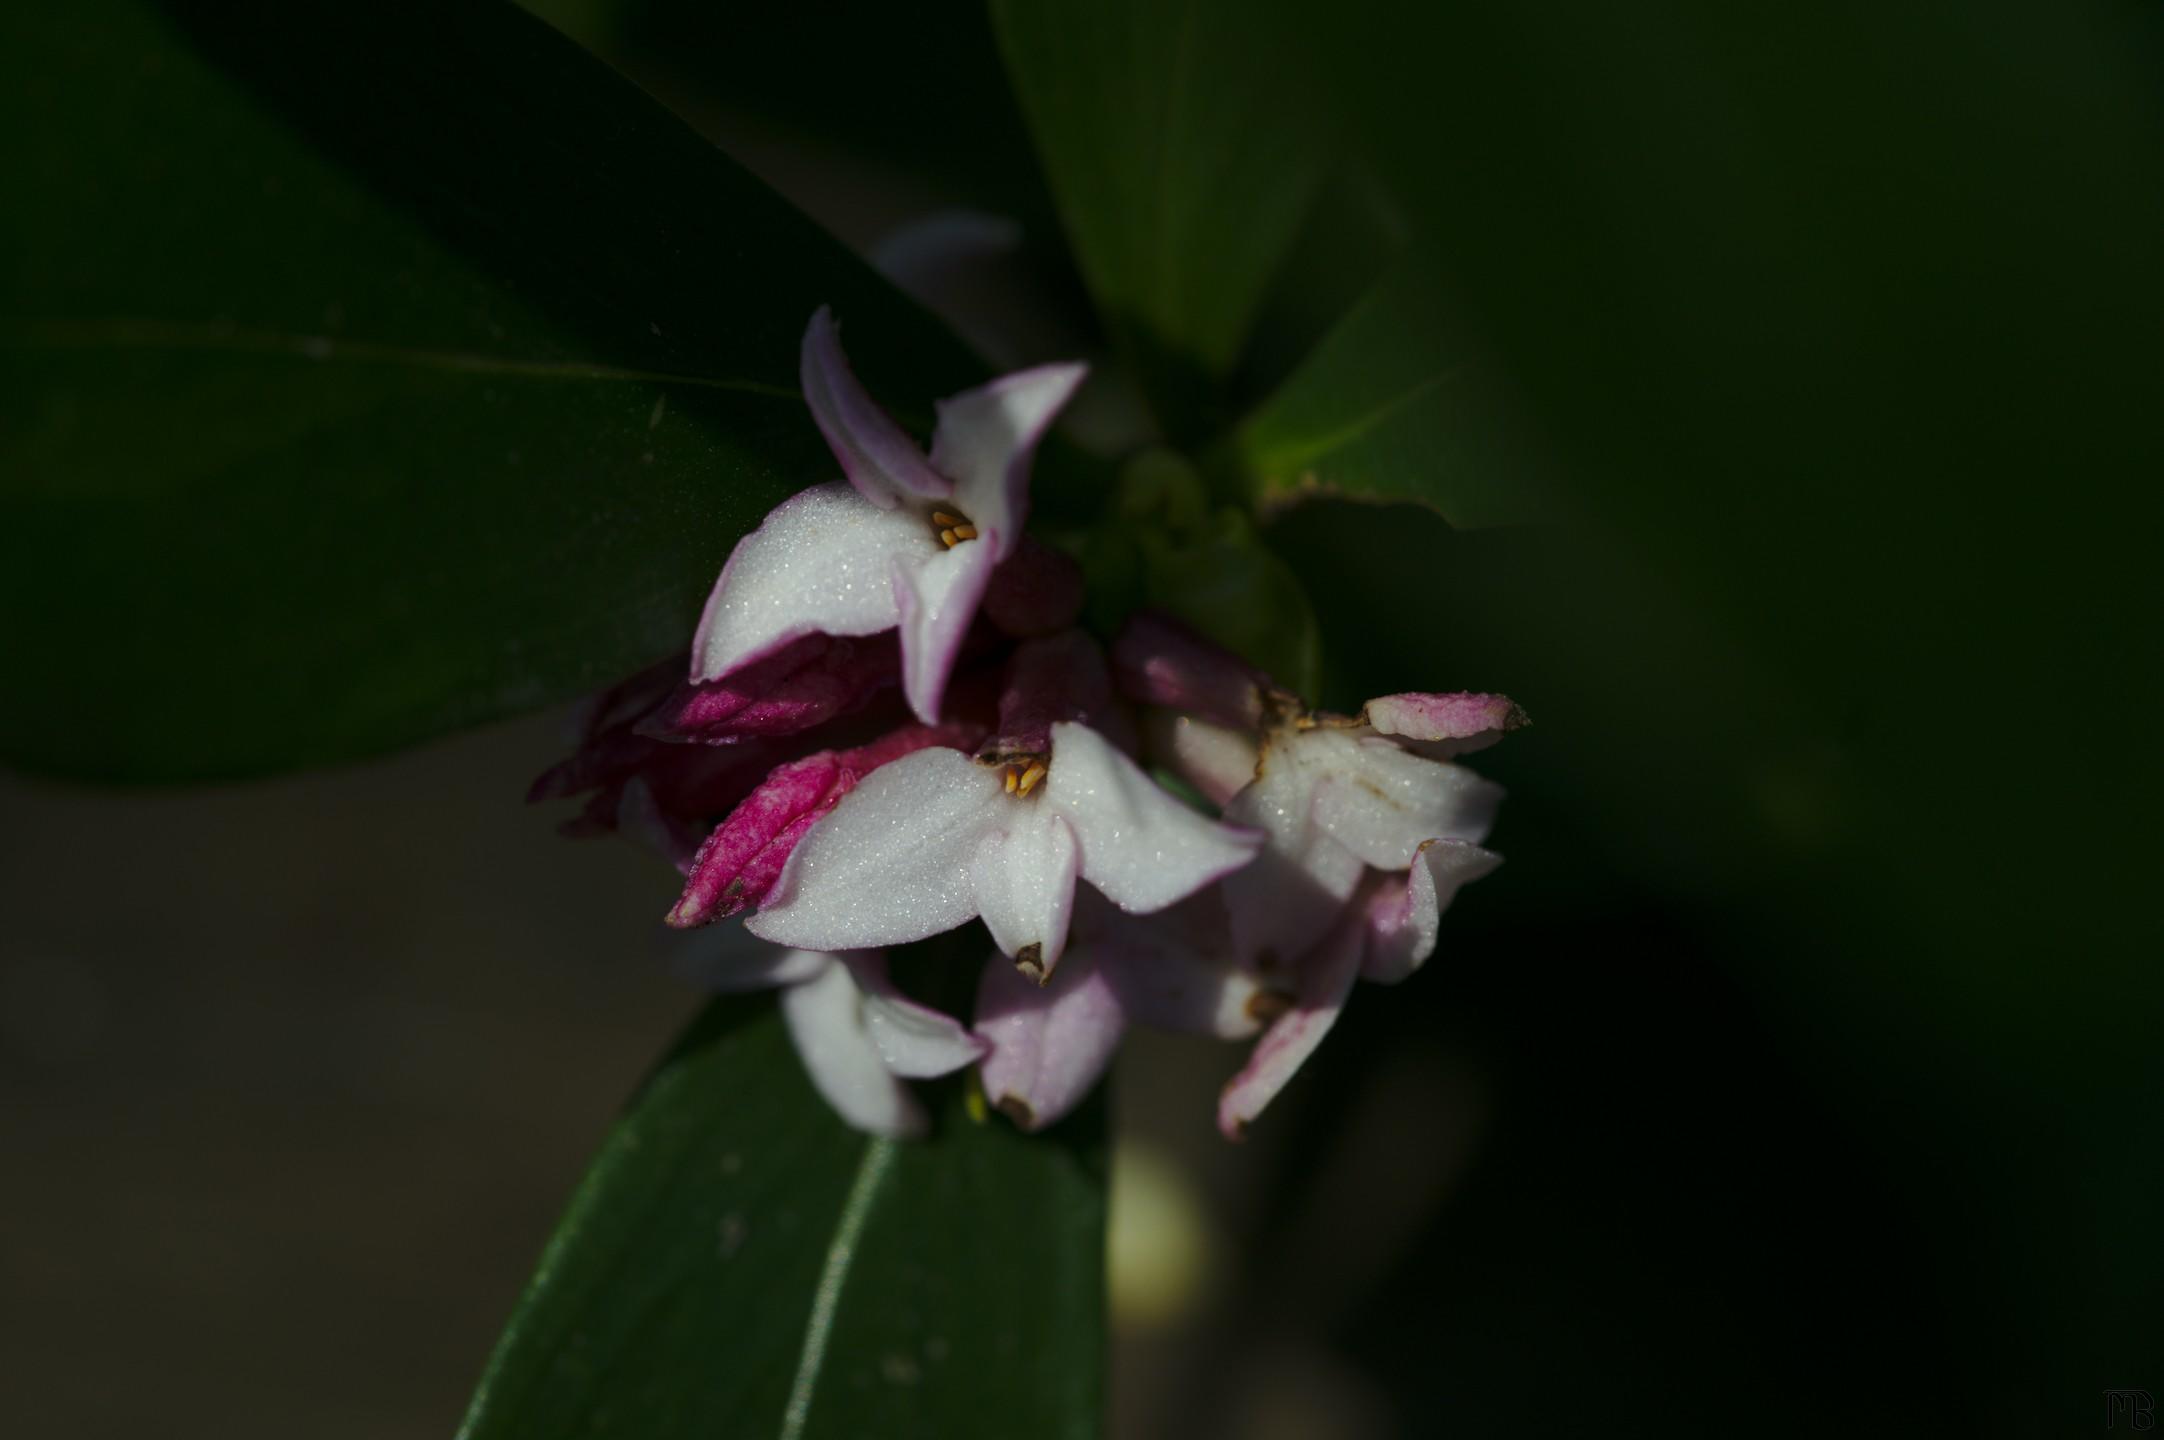 White and pink flowers hiding in leaves